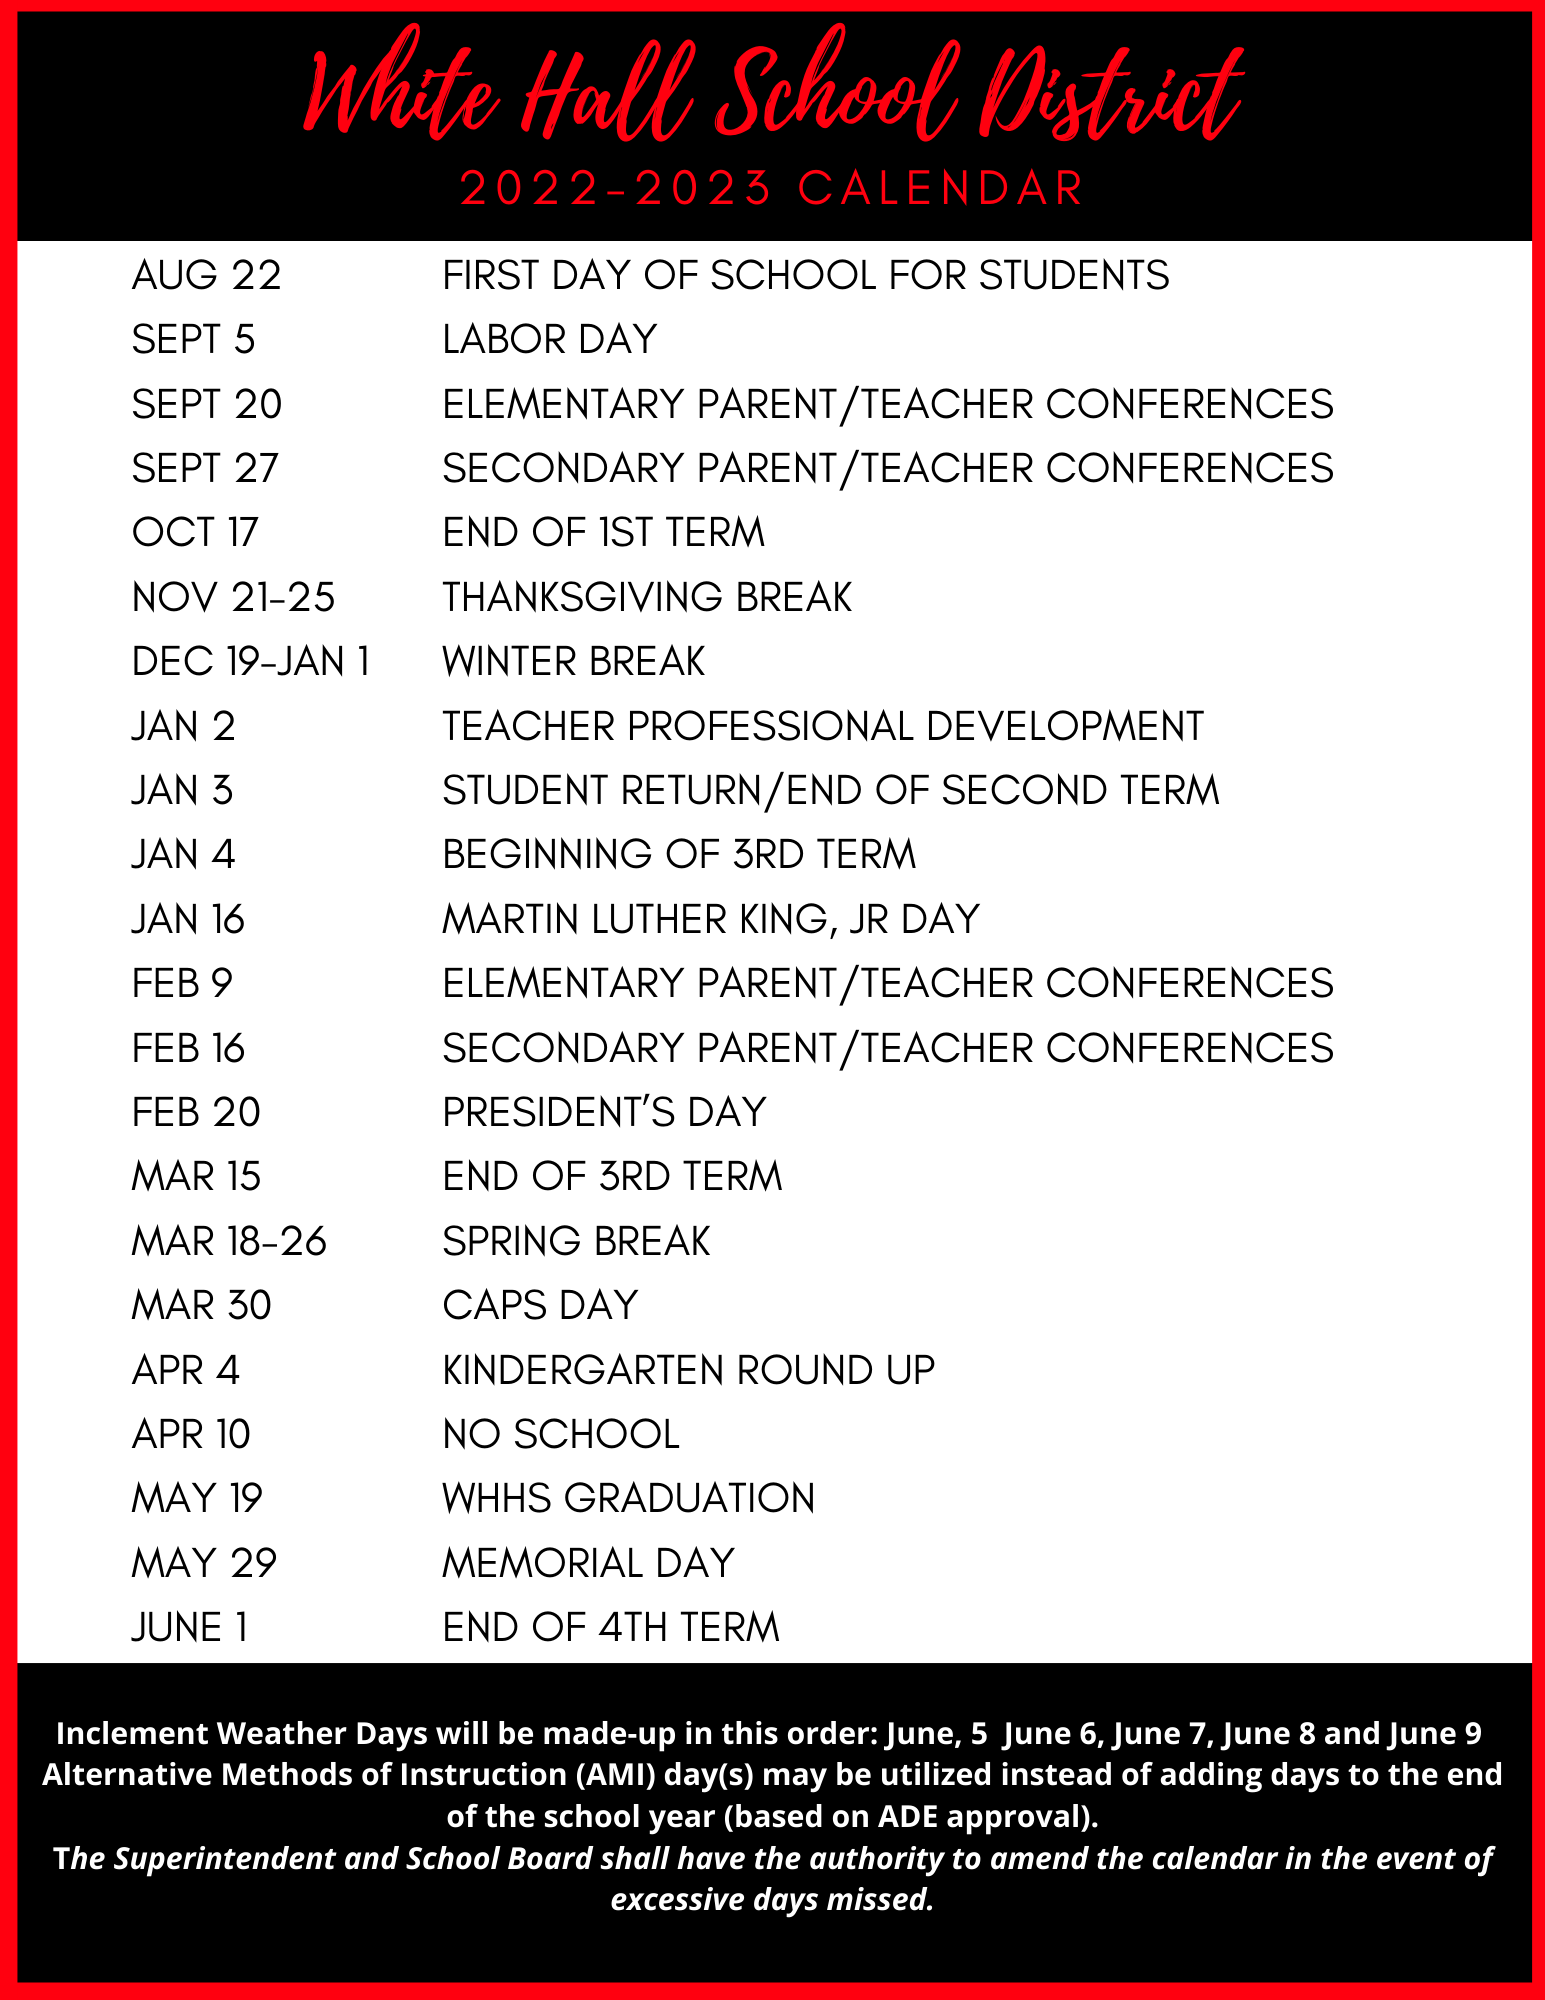 district-calendar-of-events-white-hall-school-district